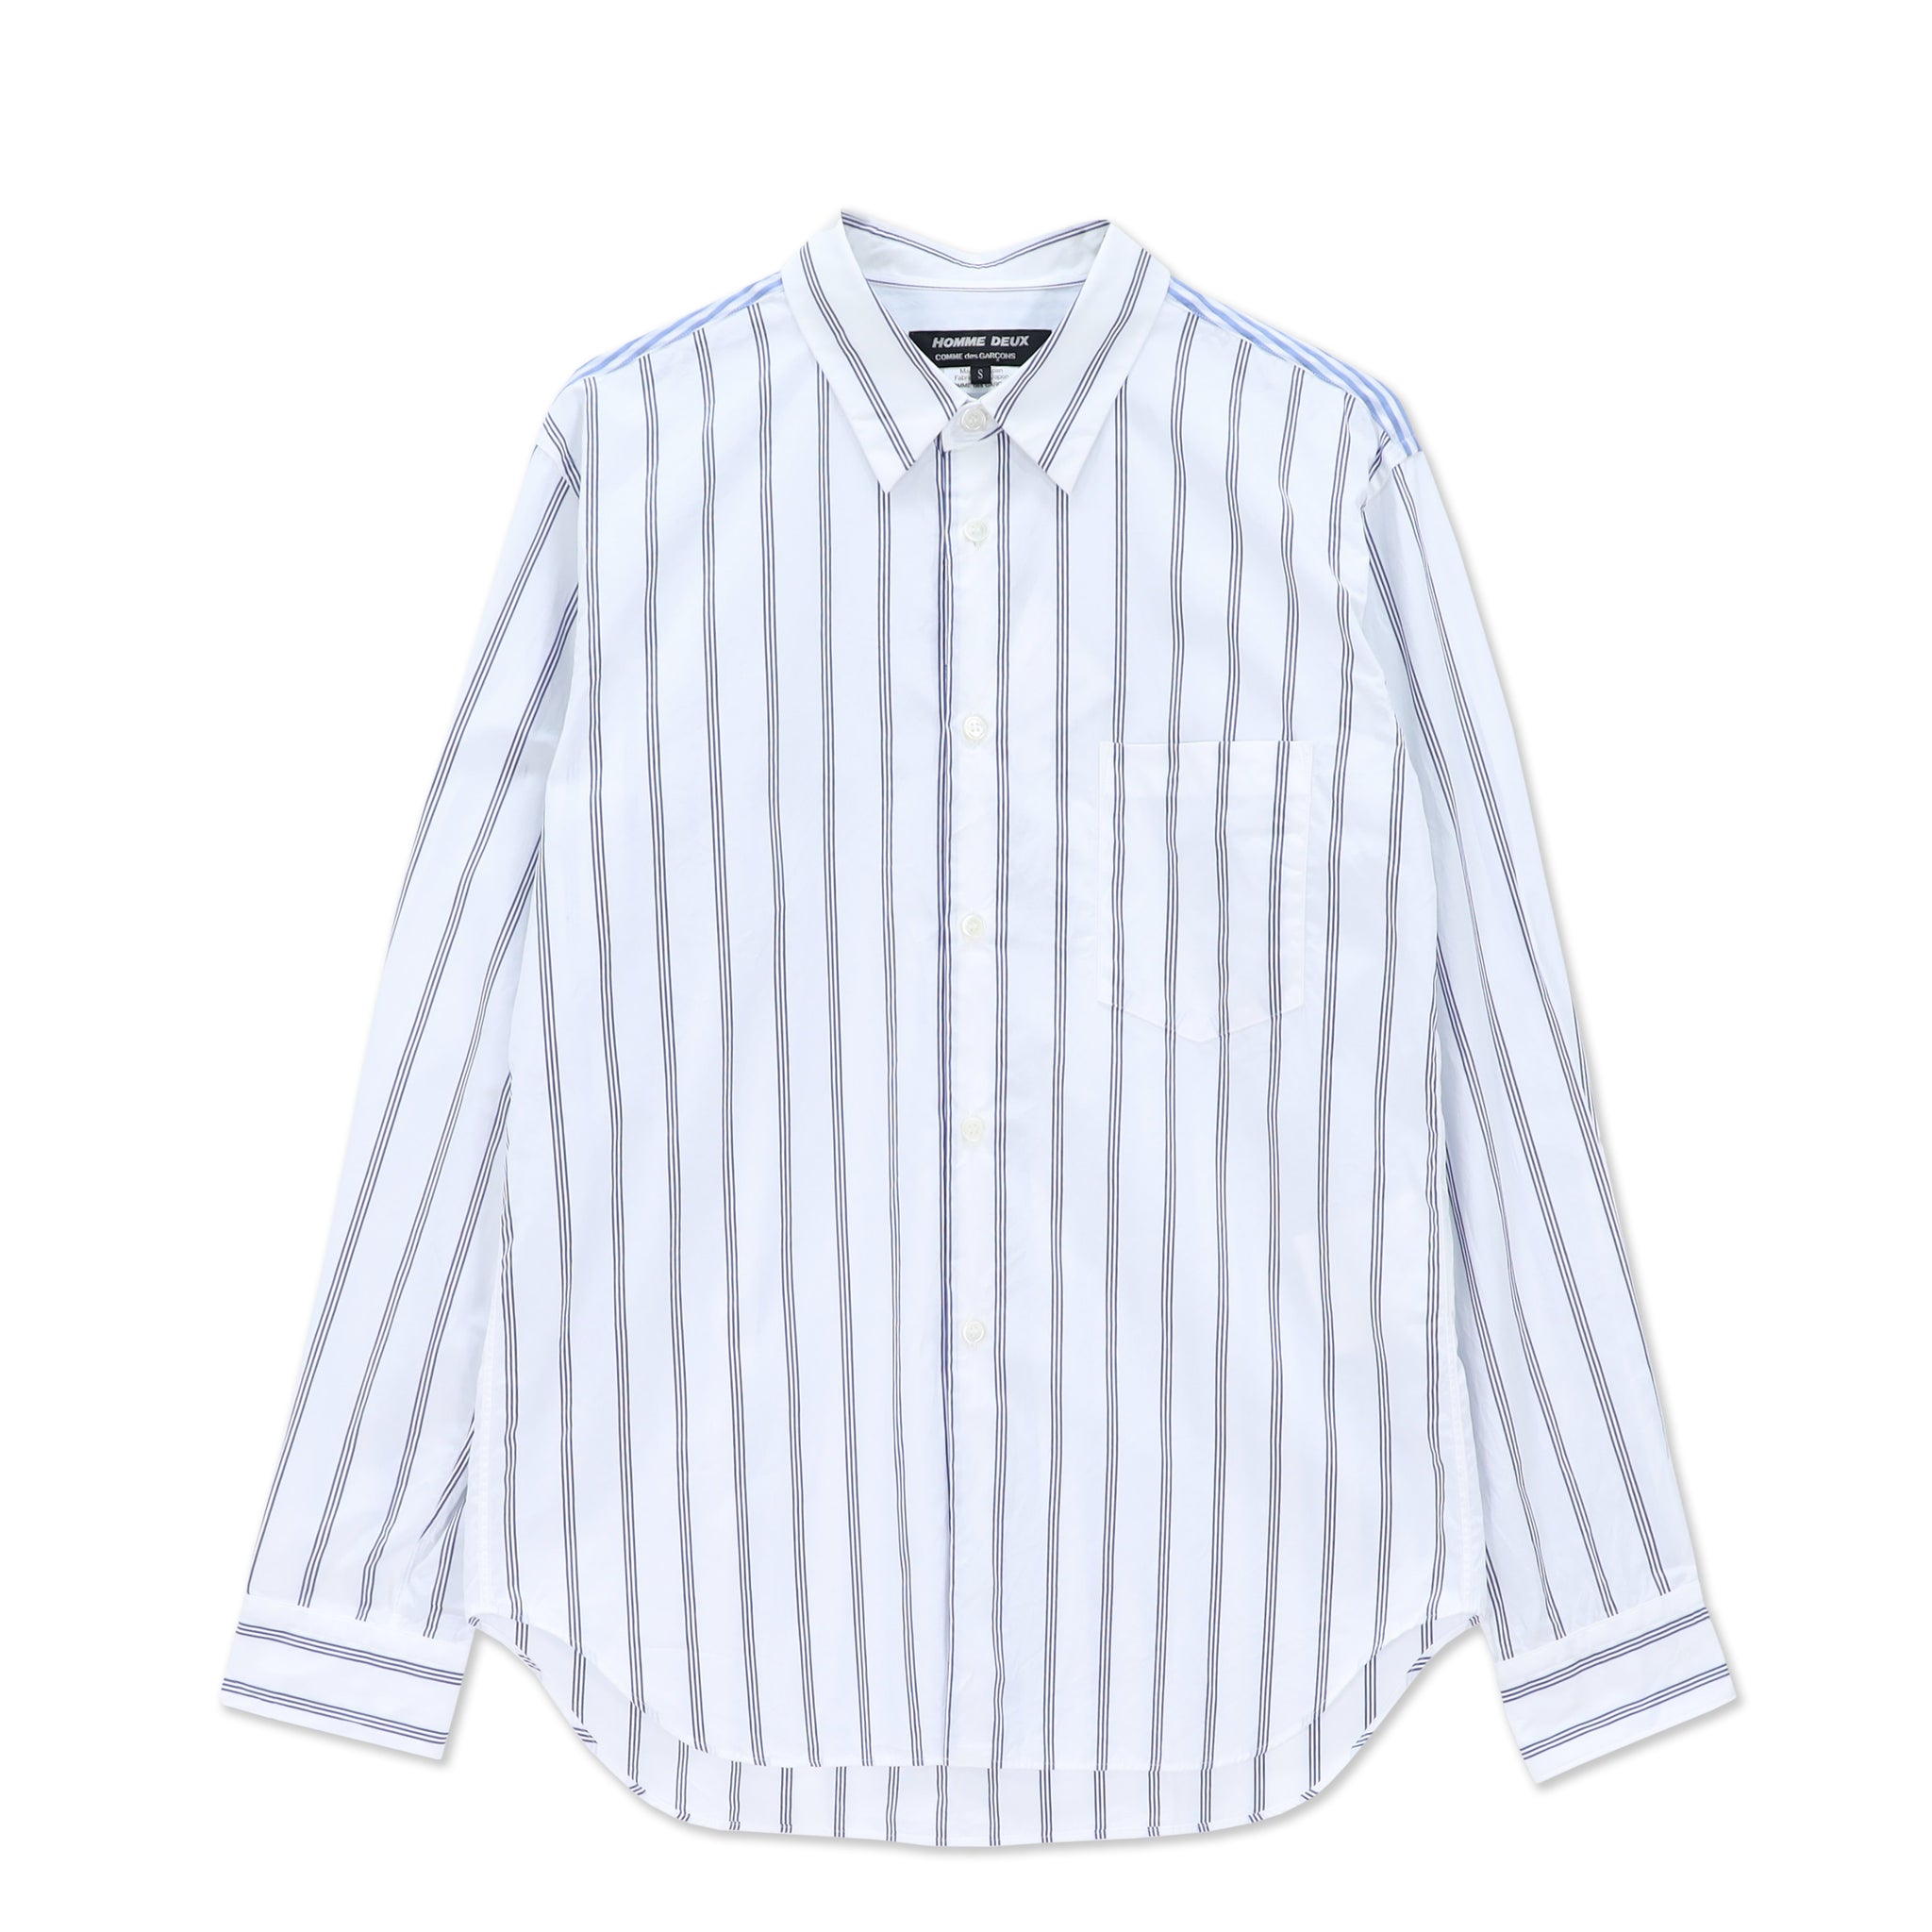 White Shirt with Blue Stripe and Contrast Yoke